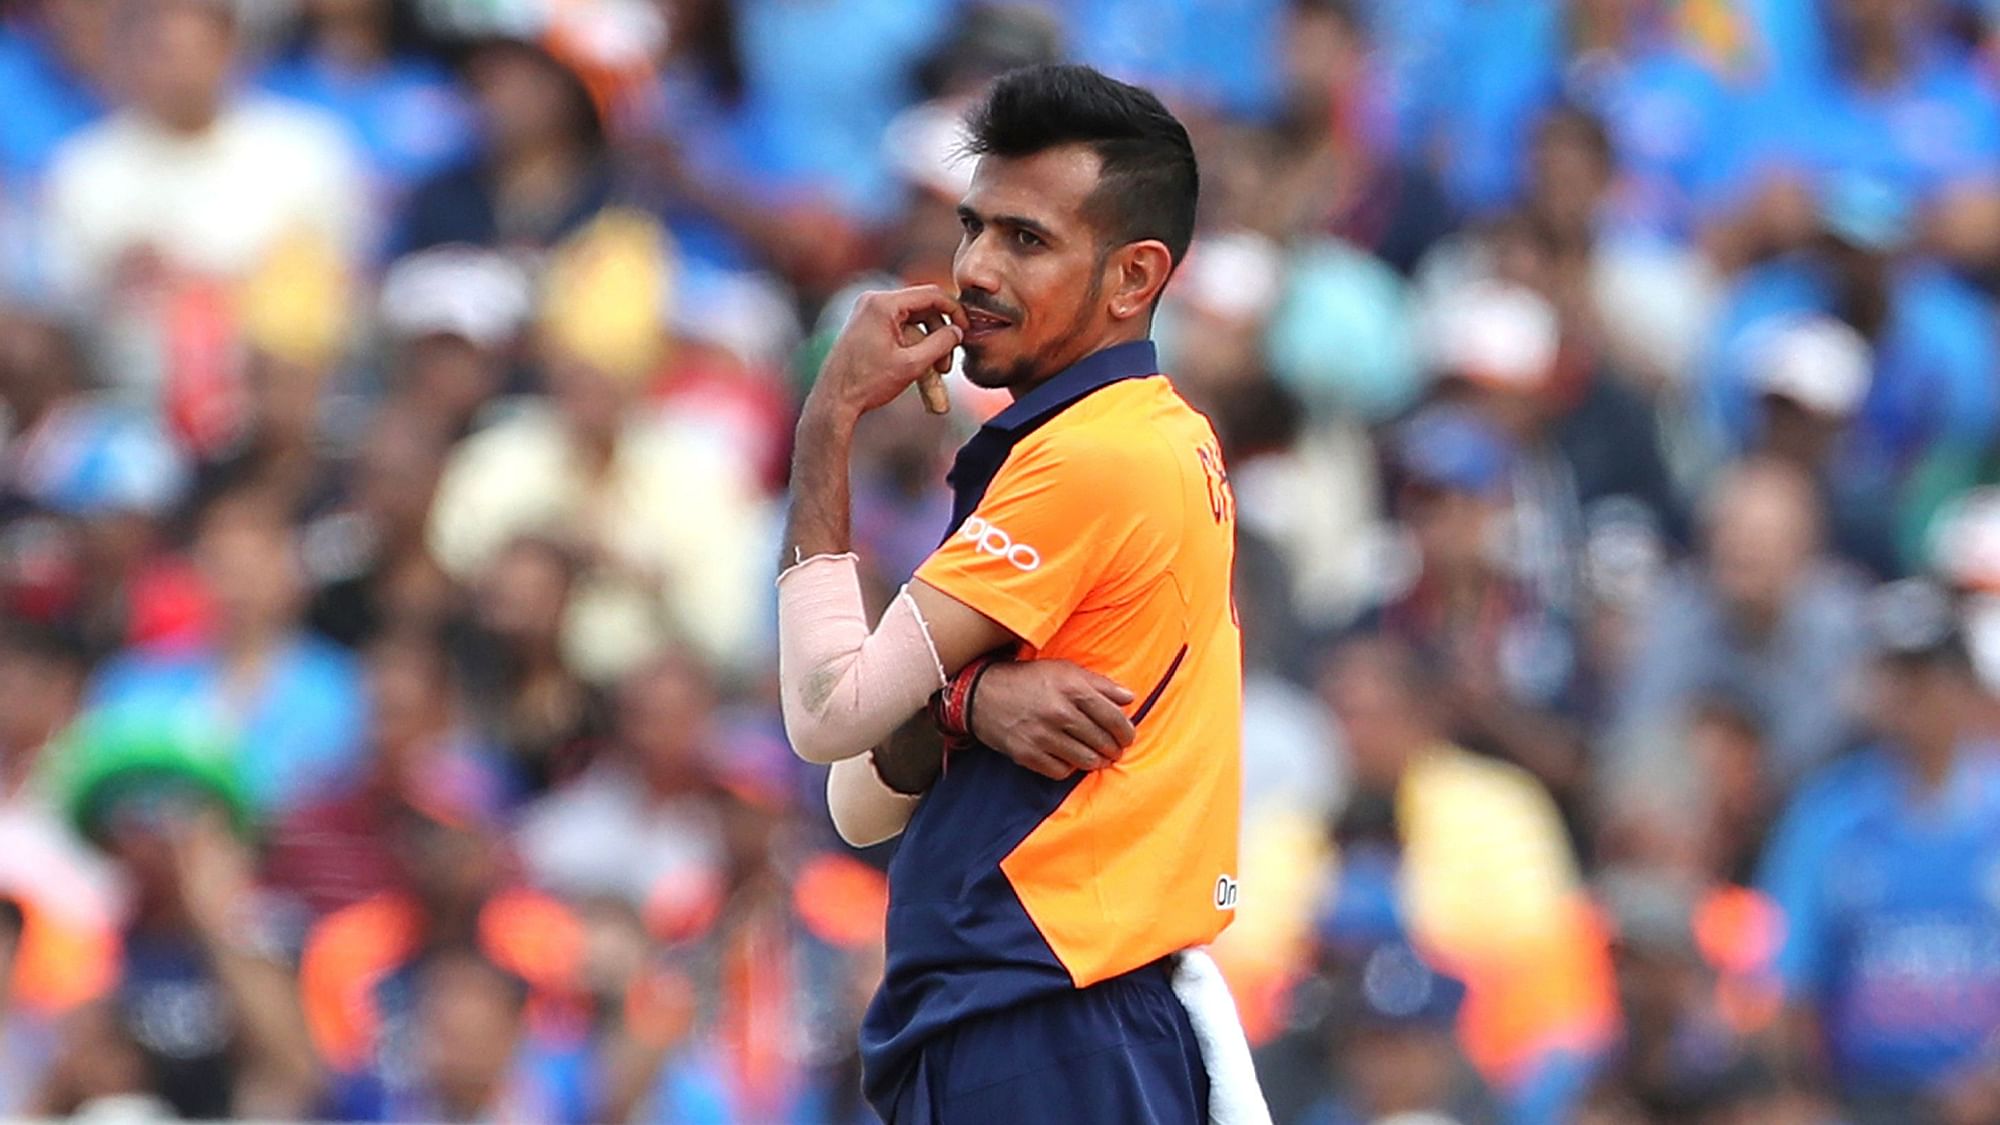 At the end of the English innings, Yuzvendra Chahal’s bowling figure read 10-0-88-0.